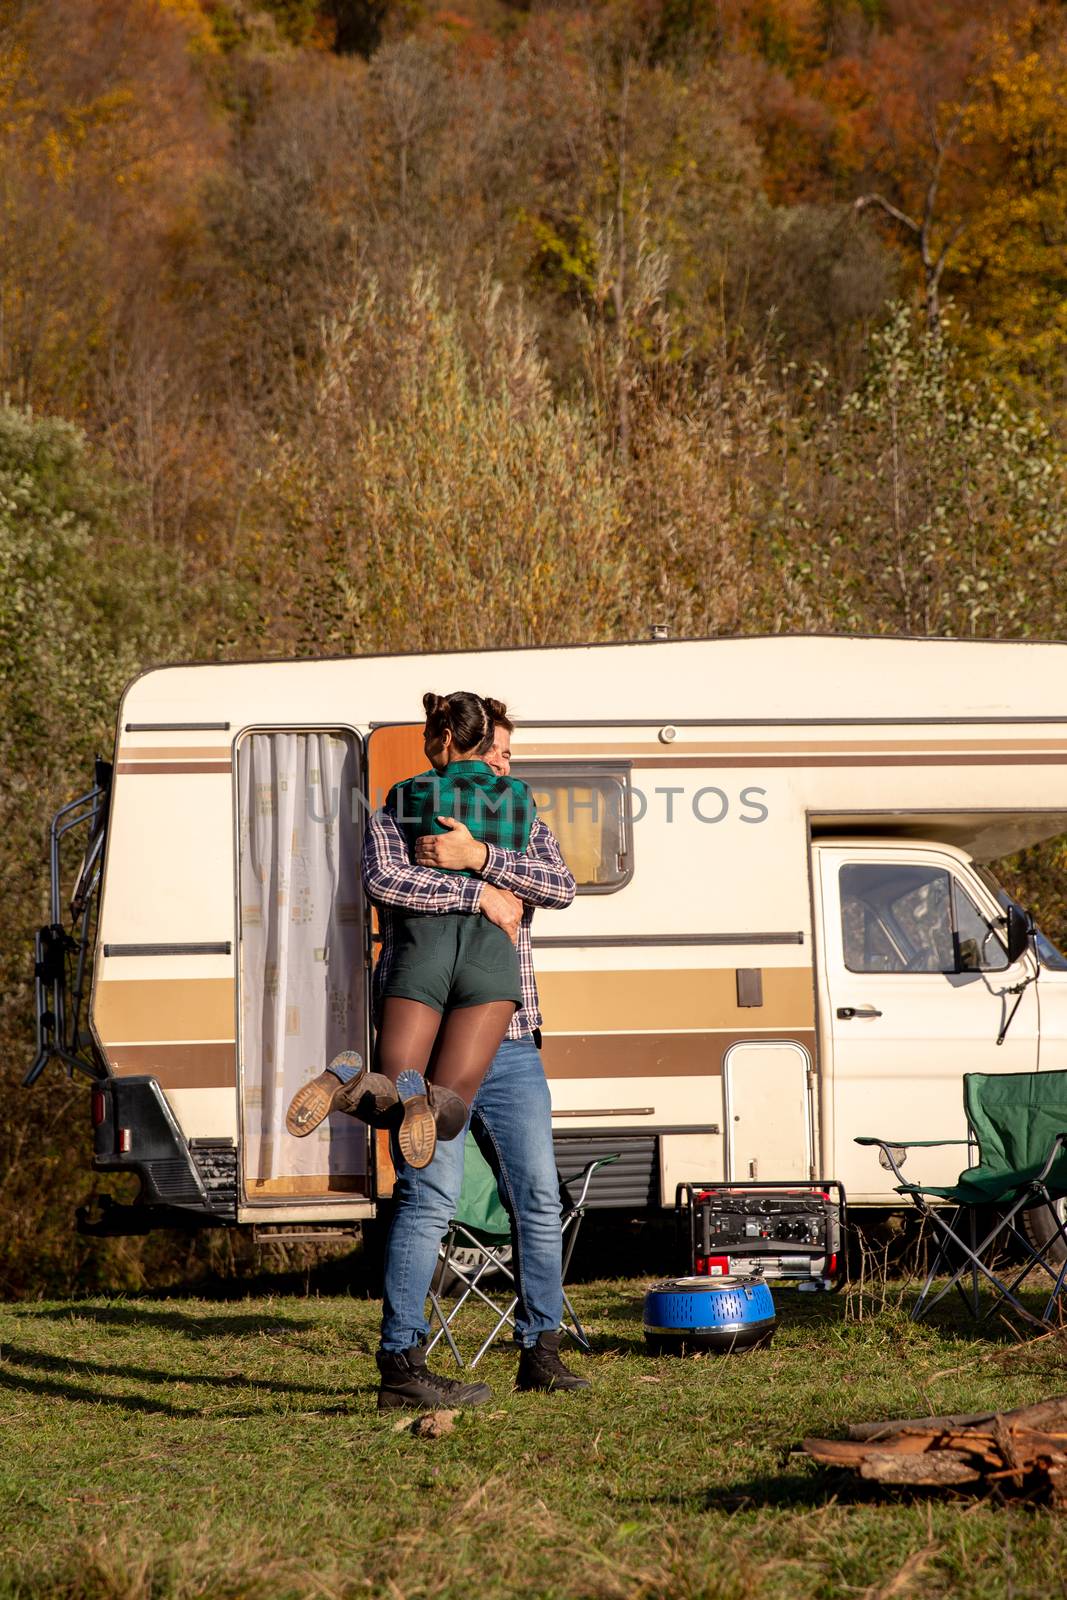 Beautiful young couple having a romantic camping site in the mountains. Retro camper van in the background